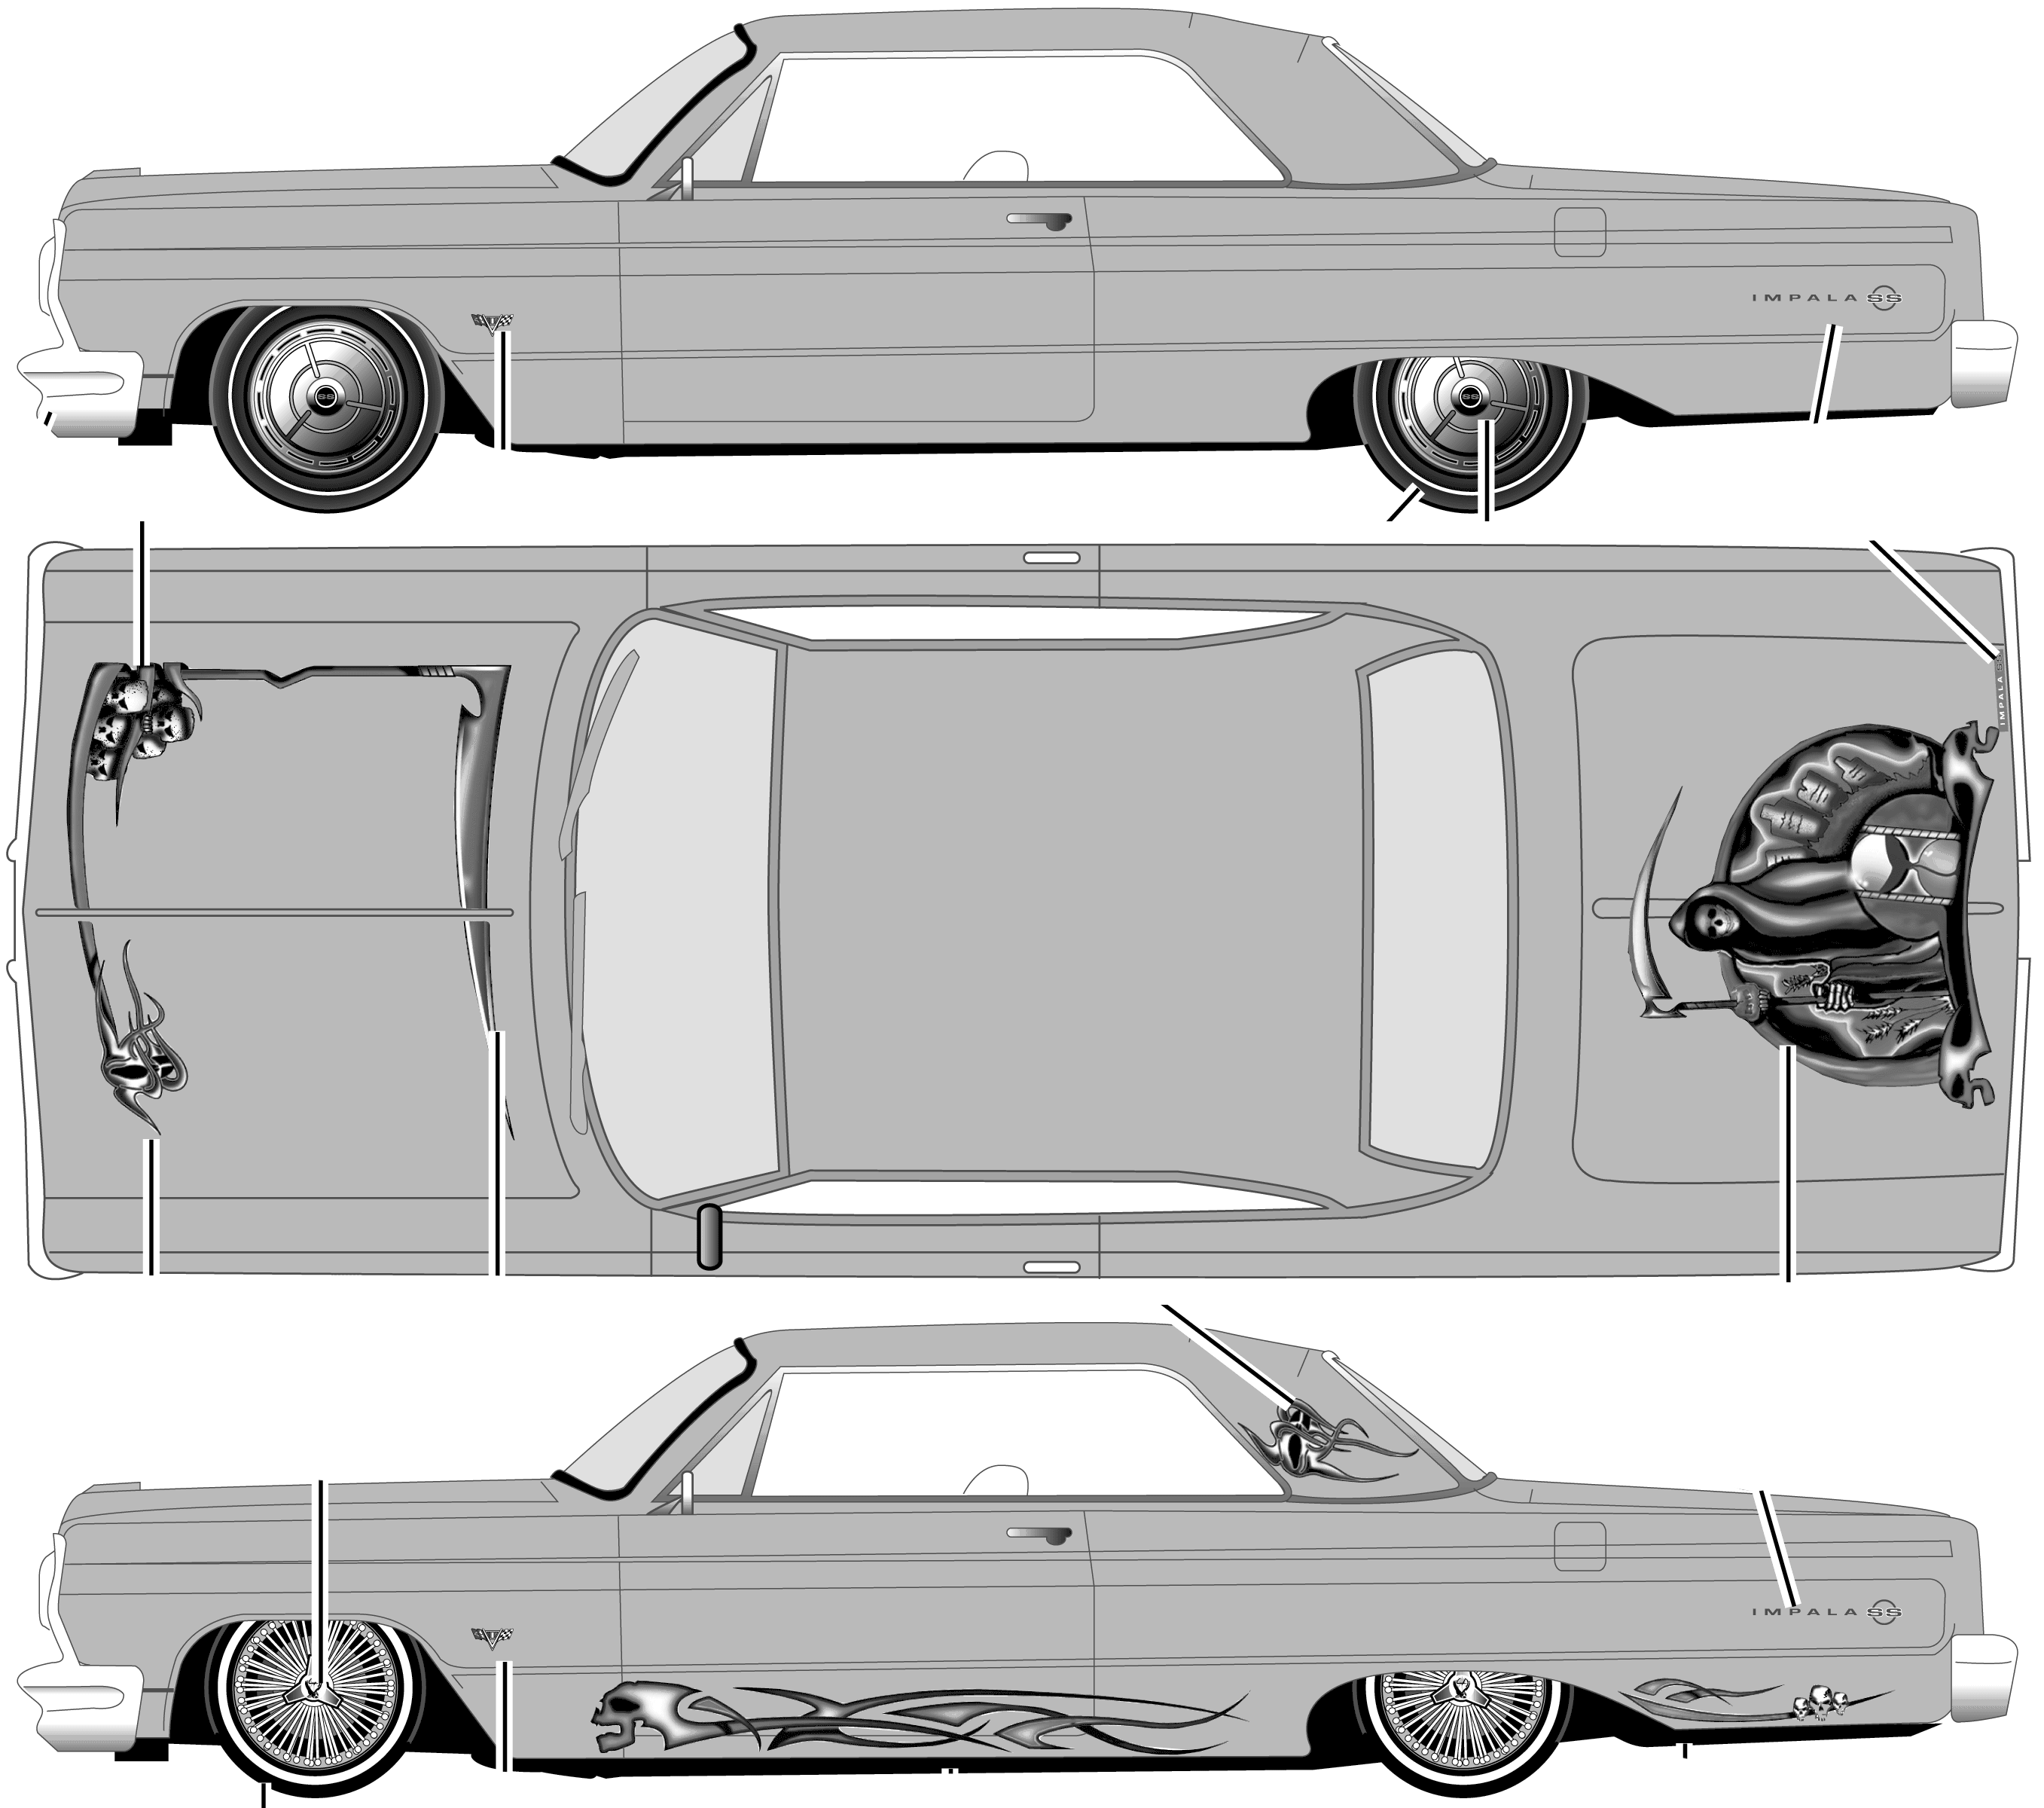 1964 Chevrolet Impala Lowrider Coupe blueprints free Outlines